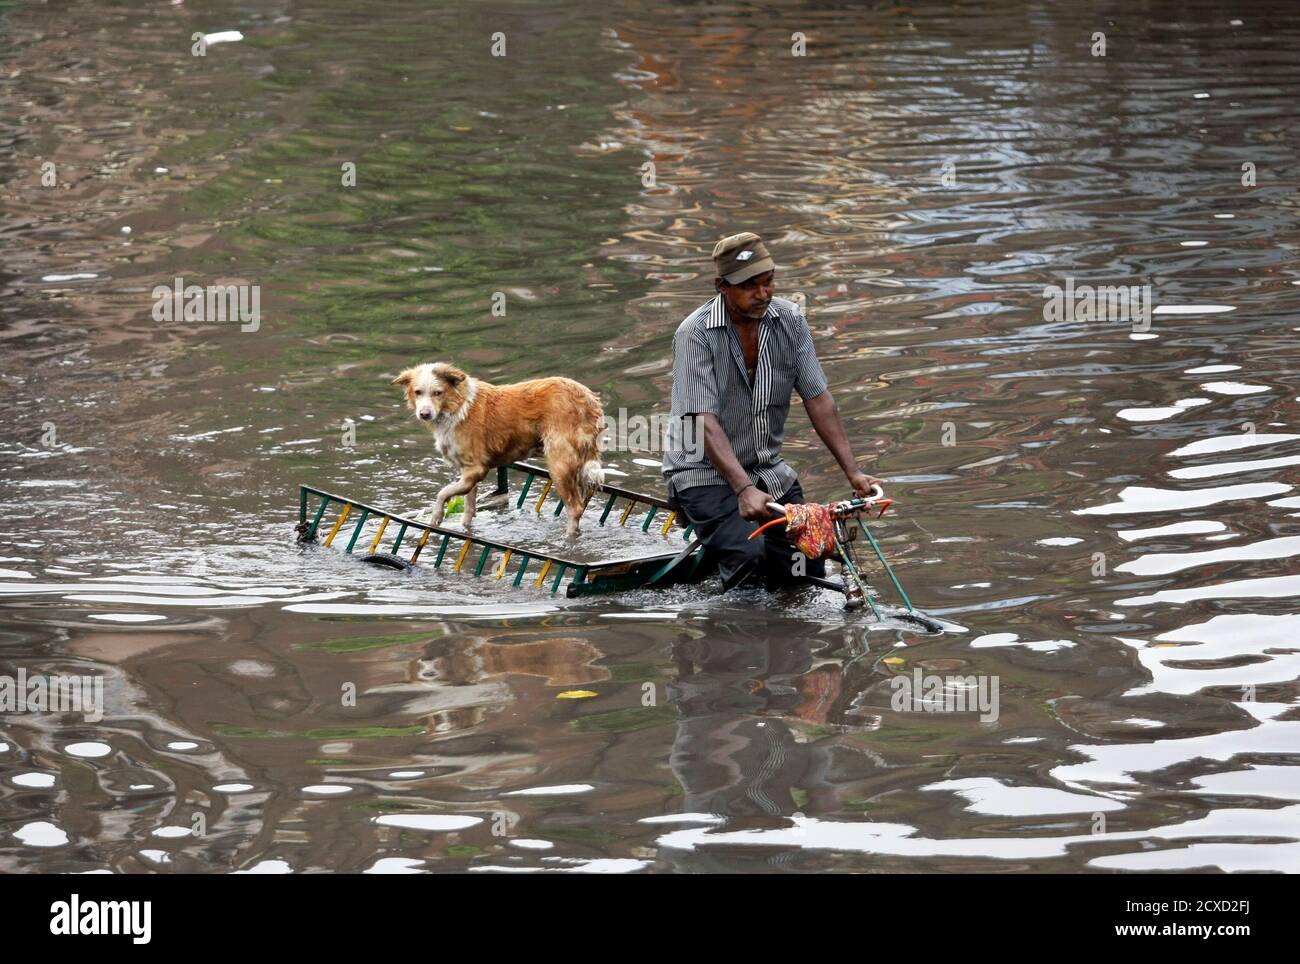 A man transports his dog on a rickshaw through a flooded street after heavy  rains in the western Indian city of Ahmedabad September 25, 2013.  REUTERS/Amit Dave (INDIA - Tags: ENVIRONMENT ANIMALS